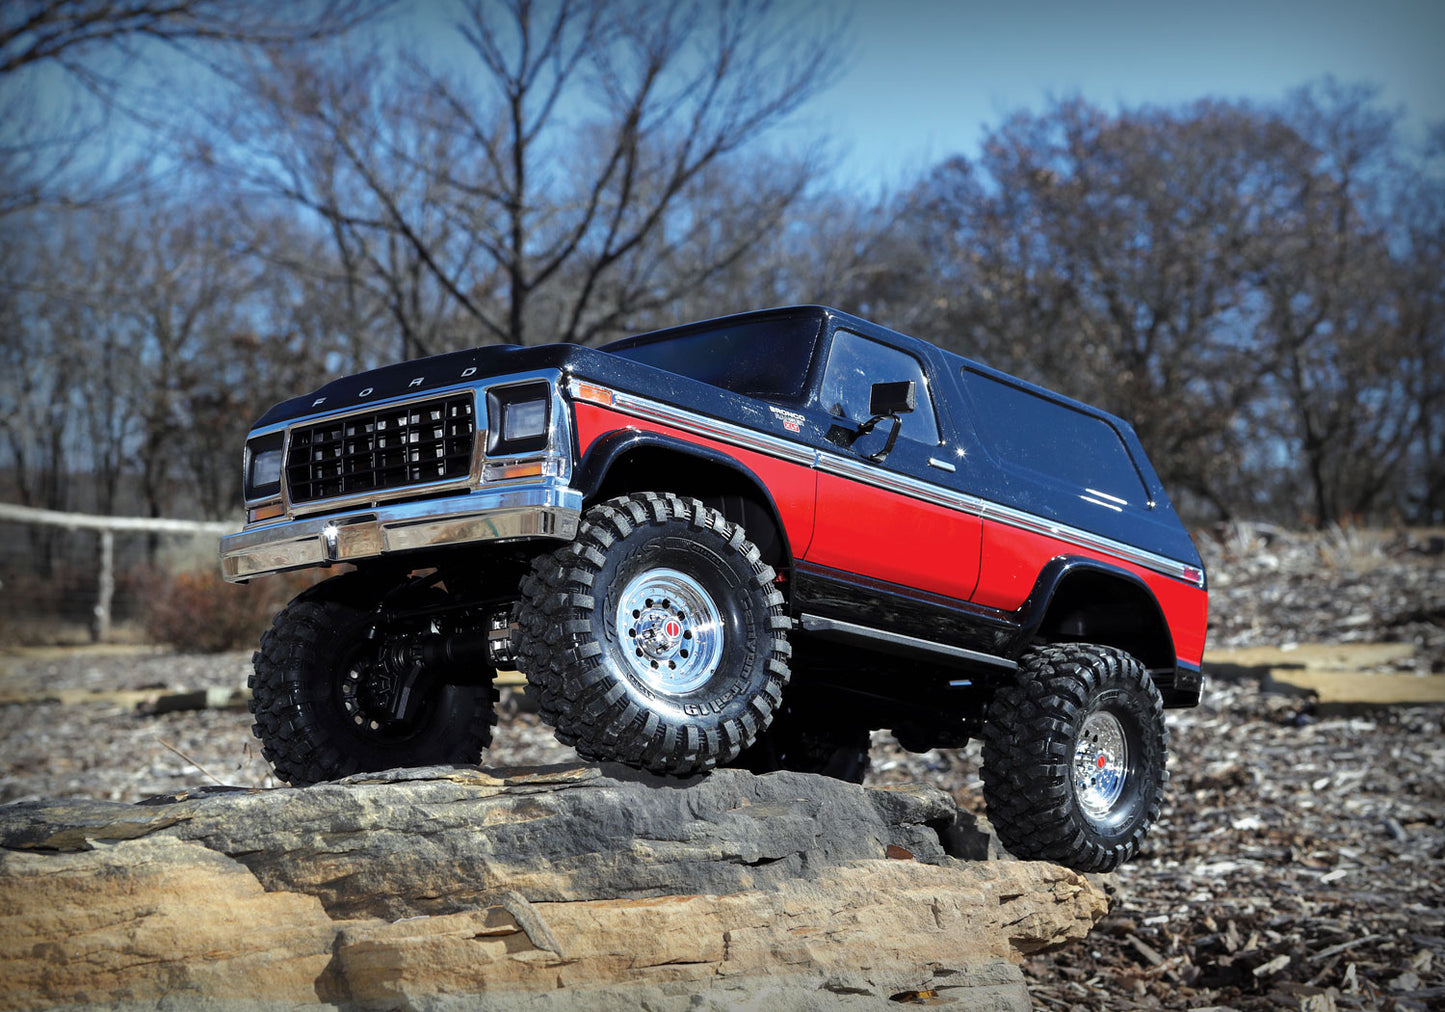 82046-4-RED TRX-4 Scale and Trail Crawler with Ford Bronco Body:  4WD Red